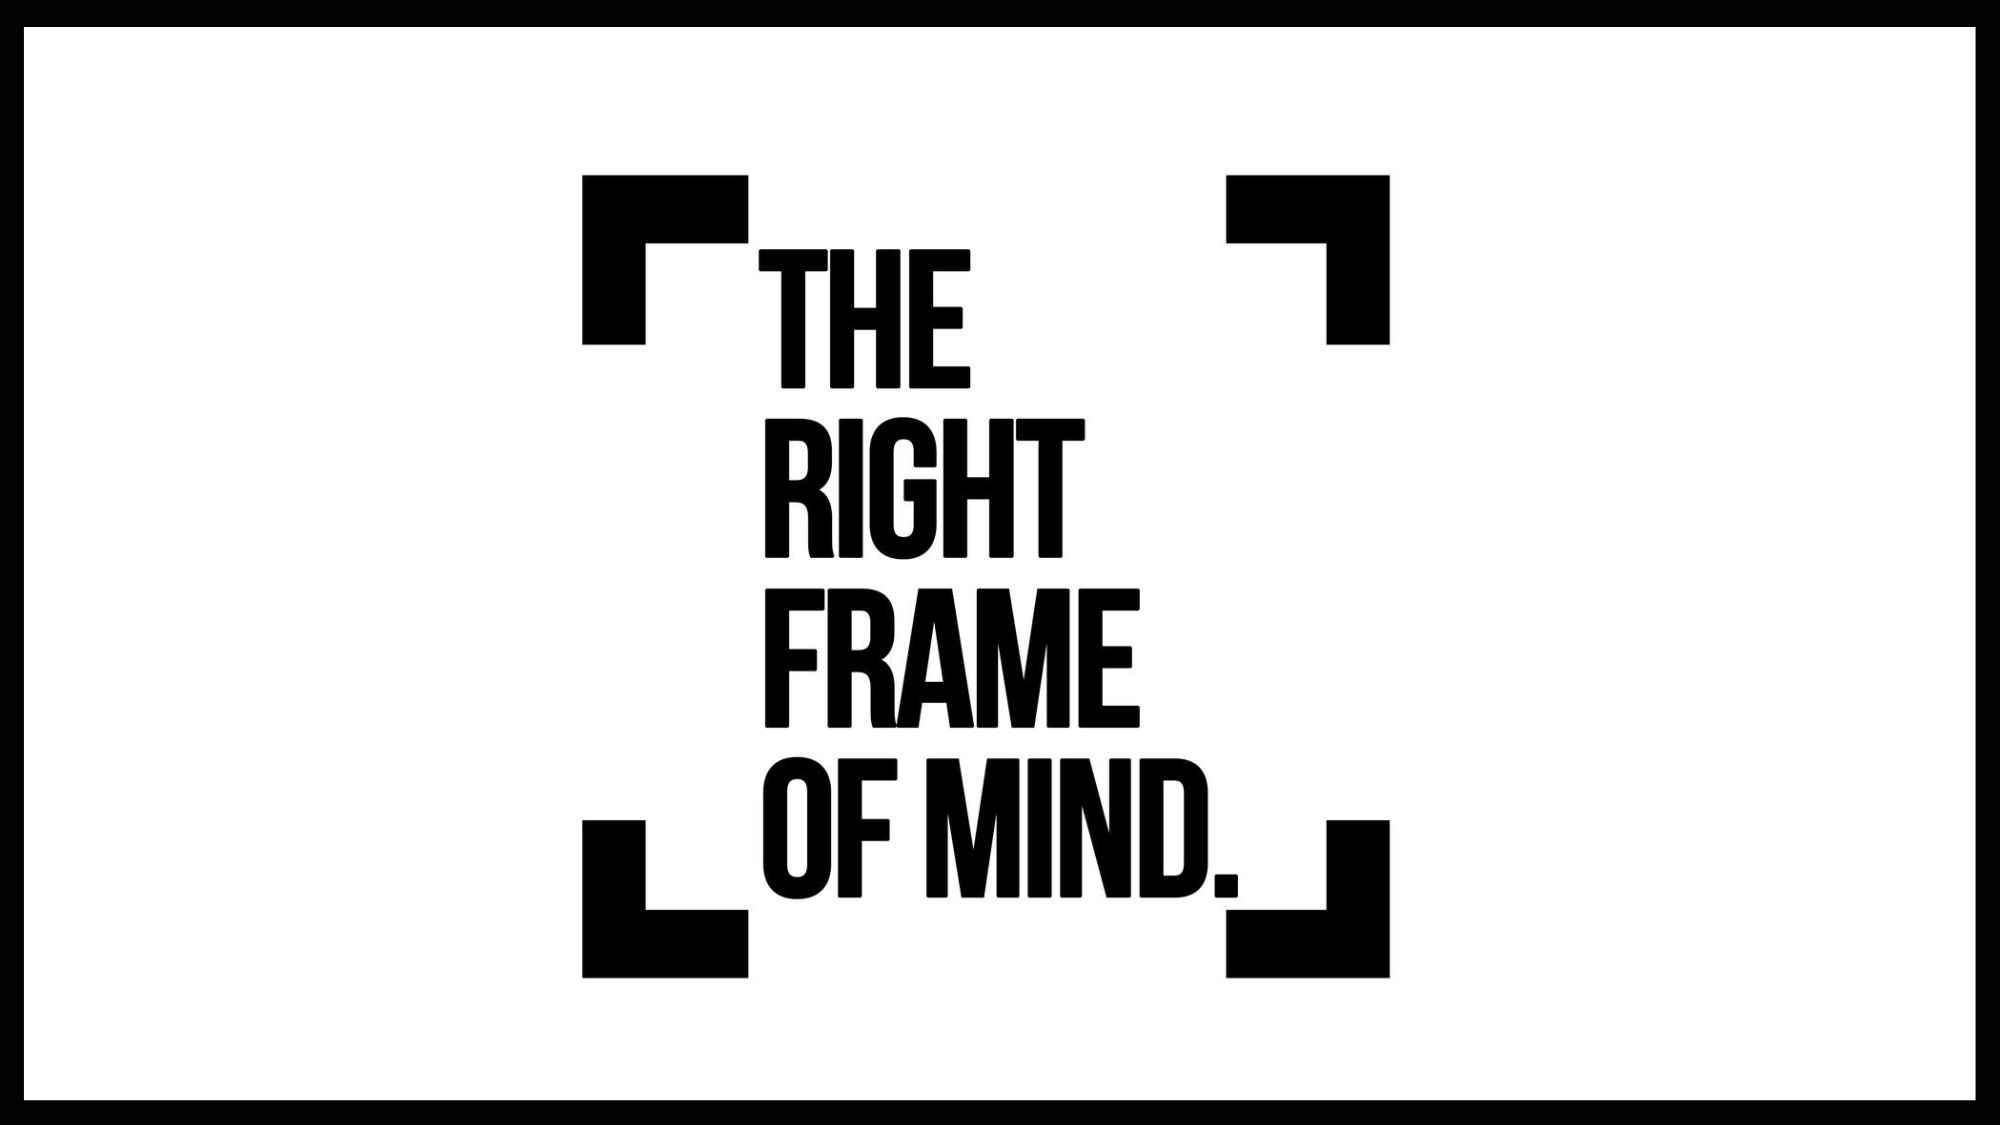 The Right Frame of Mind